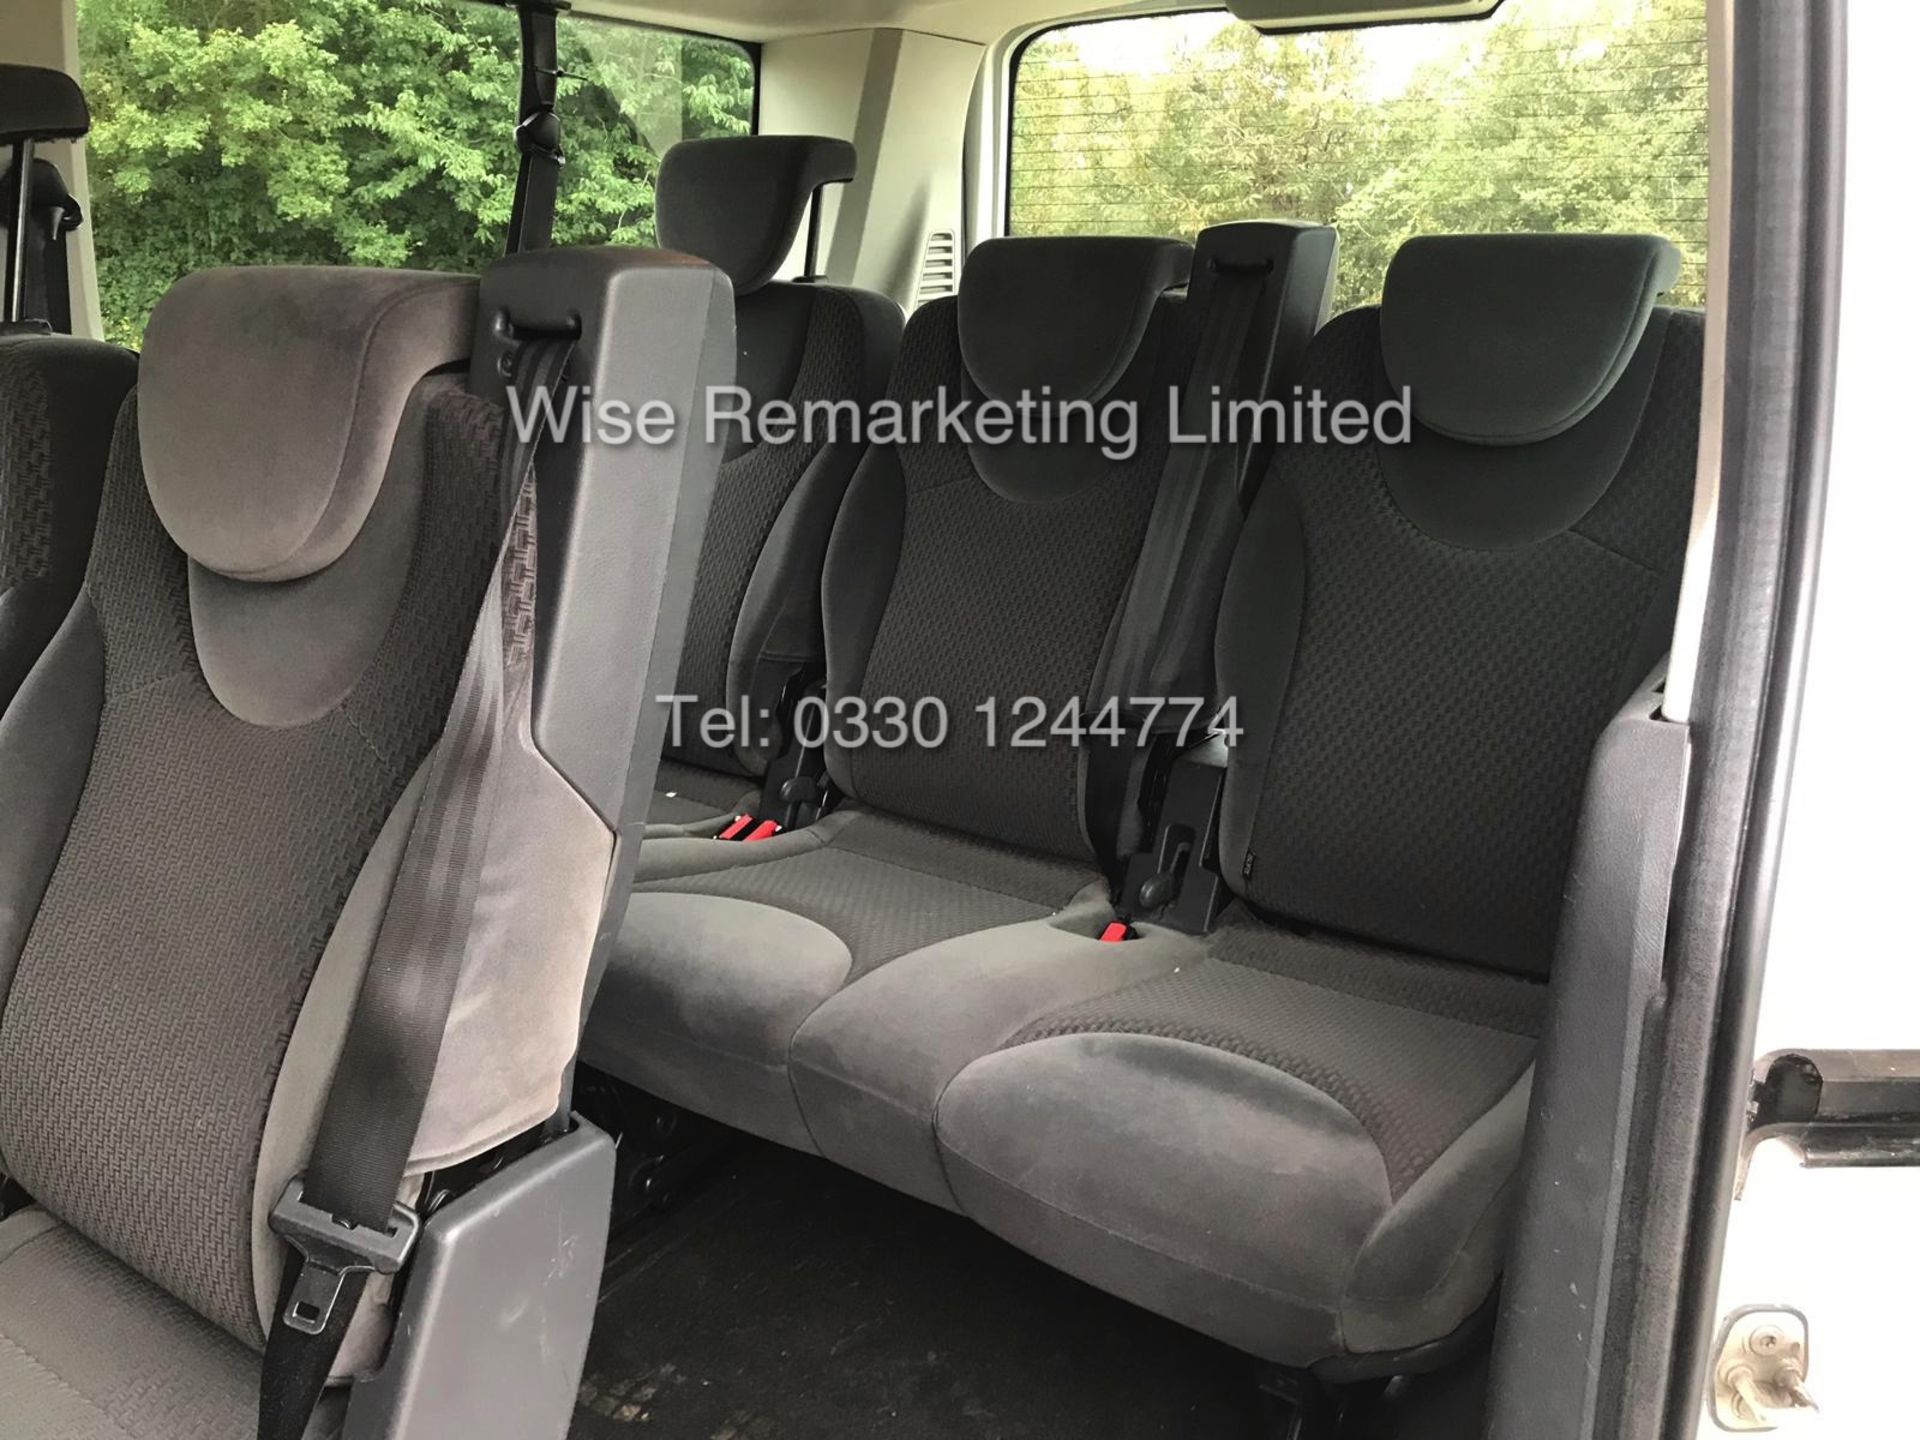 PEUGEOT EUROBUS S *MPV 8 SEATER* 2.0l (2013 - 13 REG) **AIR CON** - 1 OWNER FROM NEW - Image 19 of 19